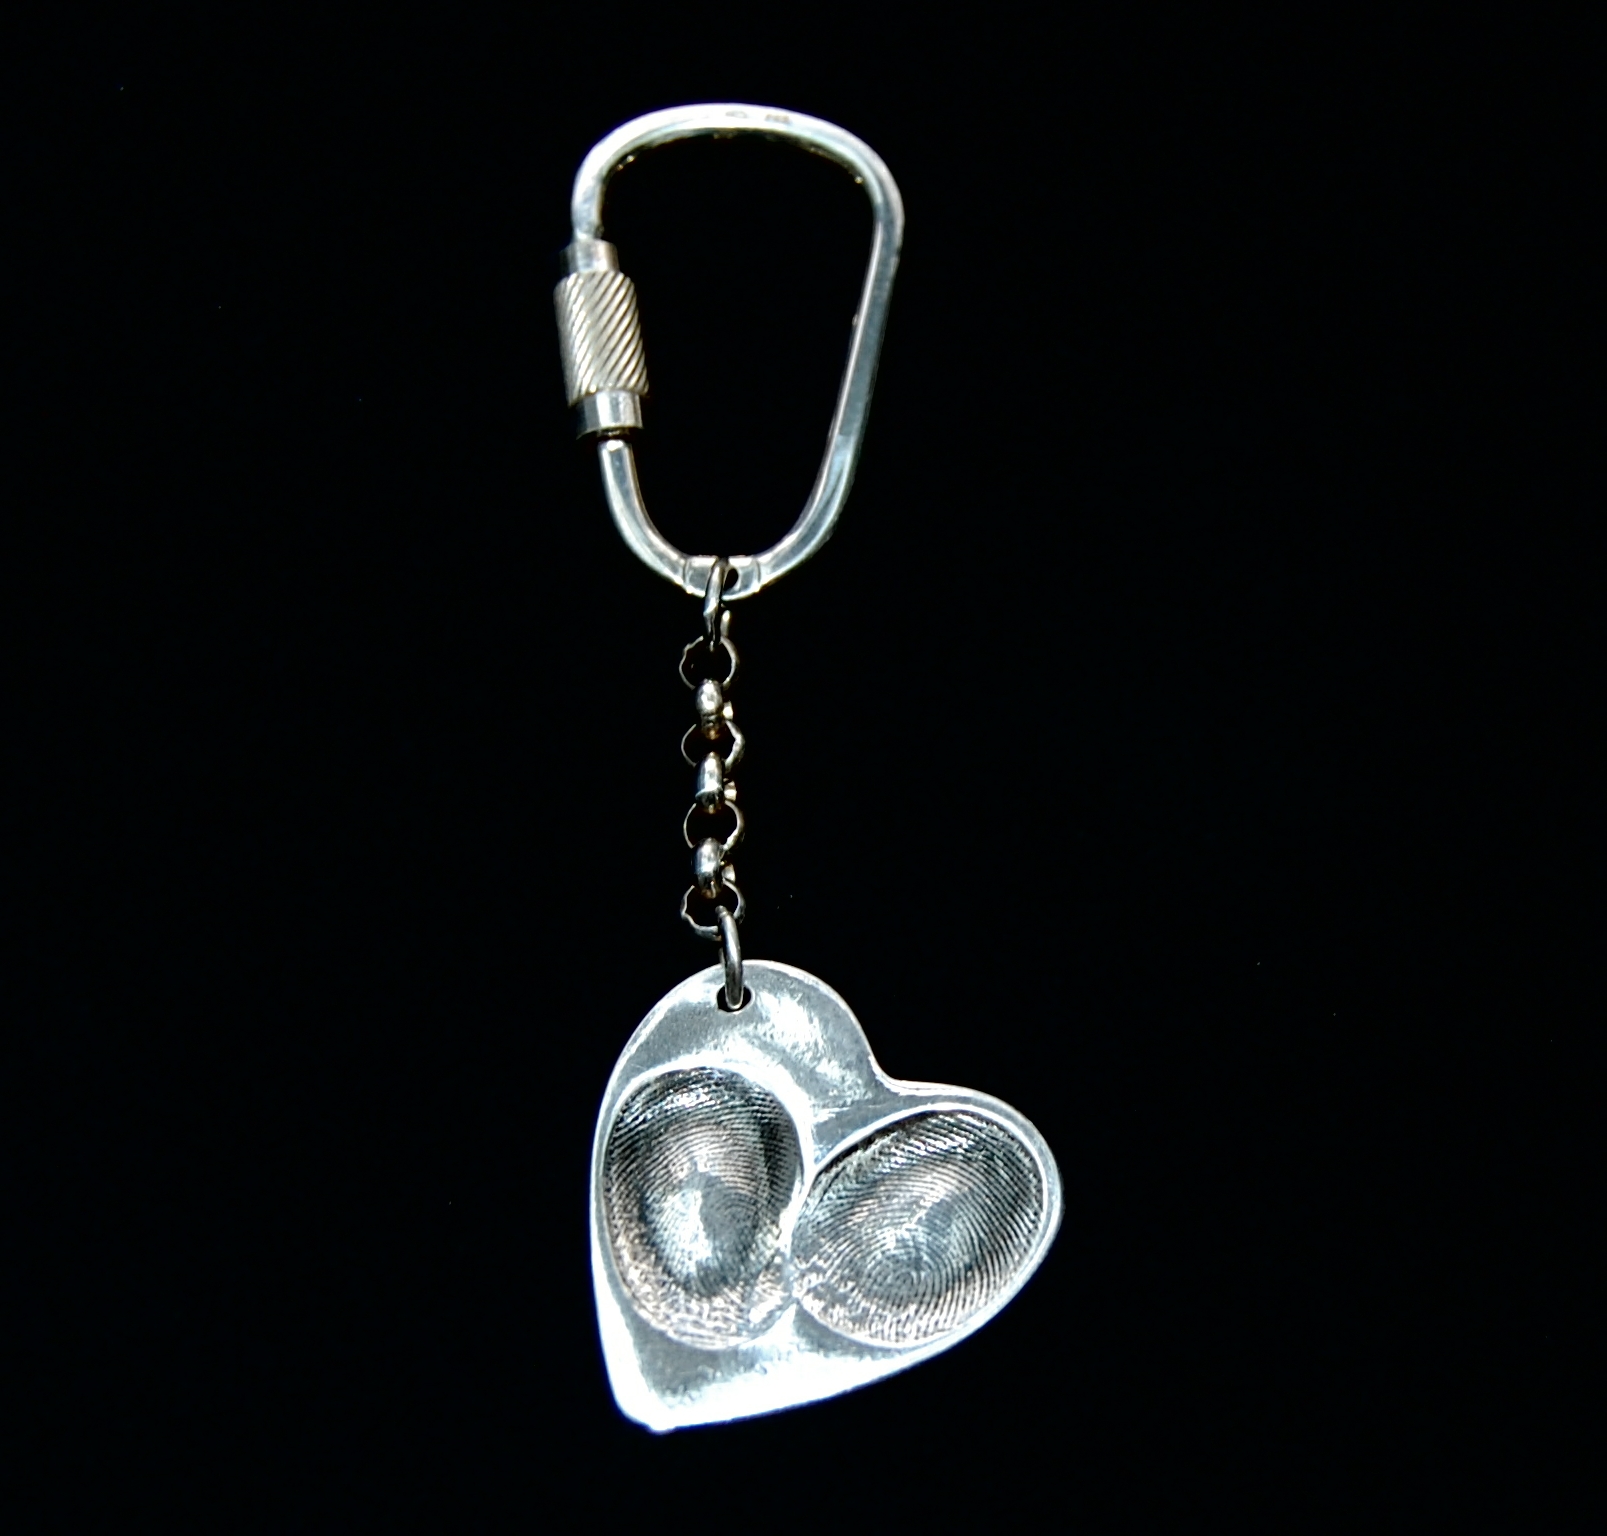 Large heart shaped silver fingerprint keyring with sterling silver keyring attachment.